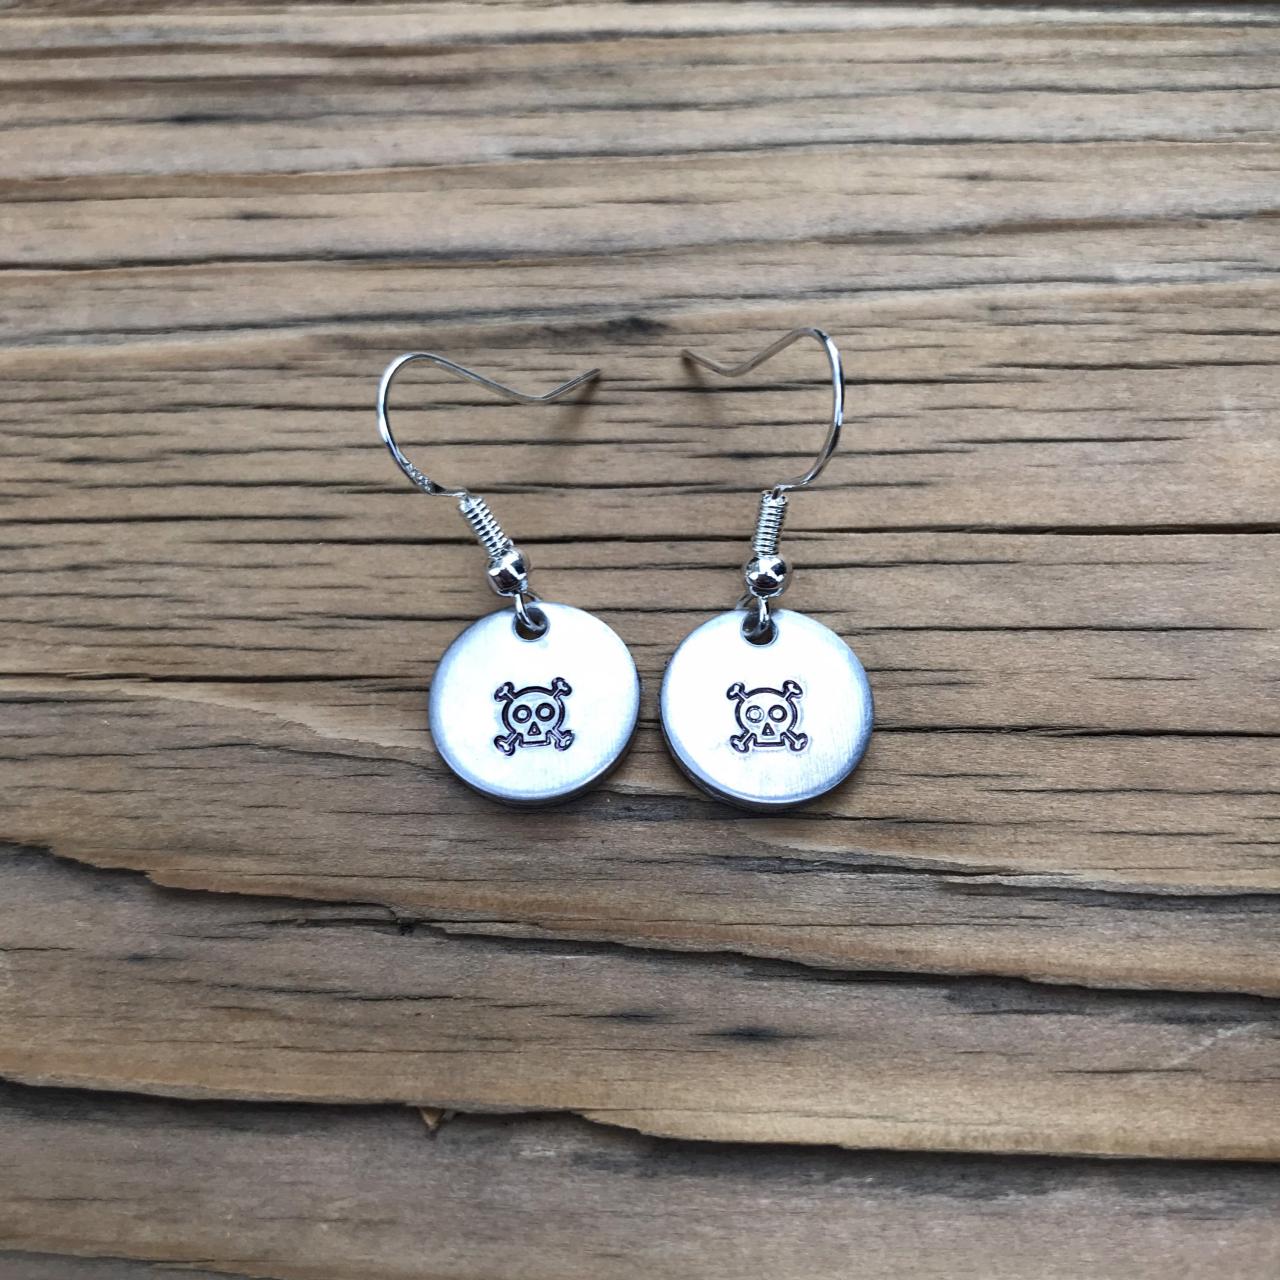 Earrings, Silver Tiny Skull and Crossbones Earrings, jewelry aluminum, hand stamped